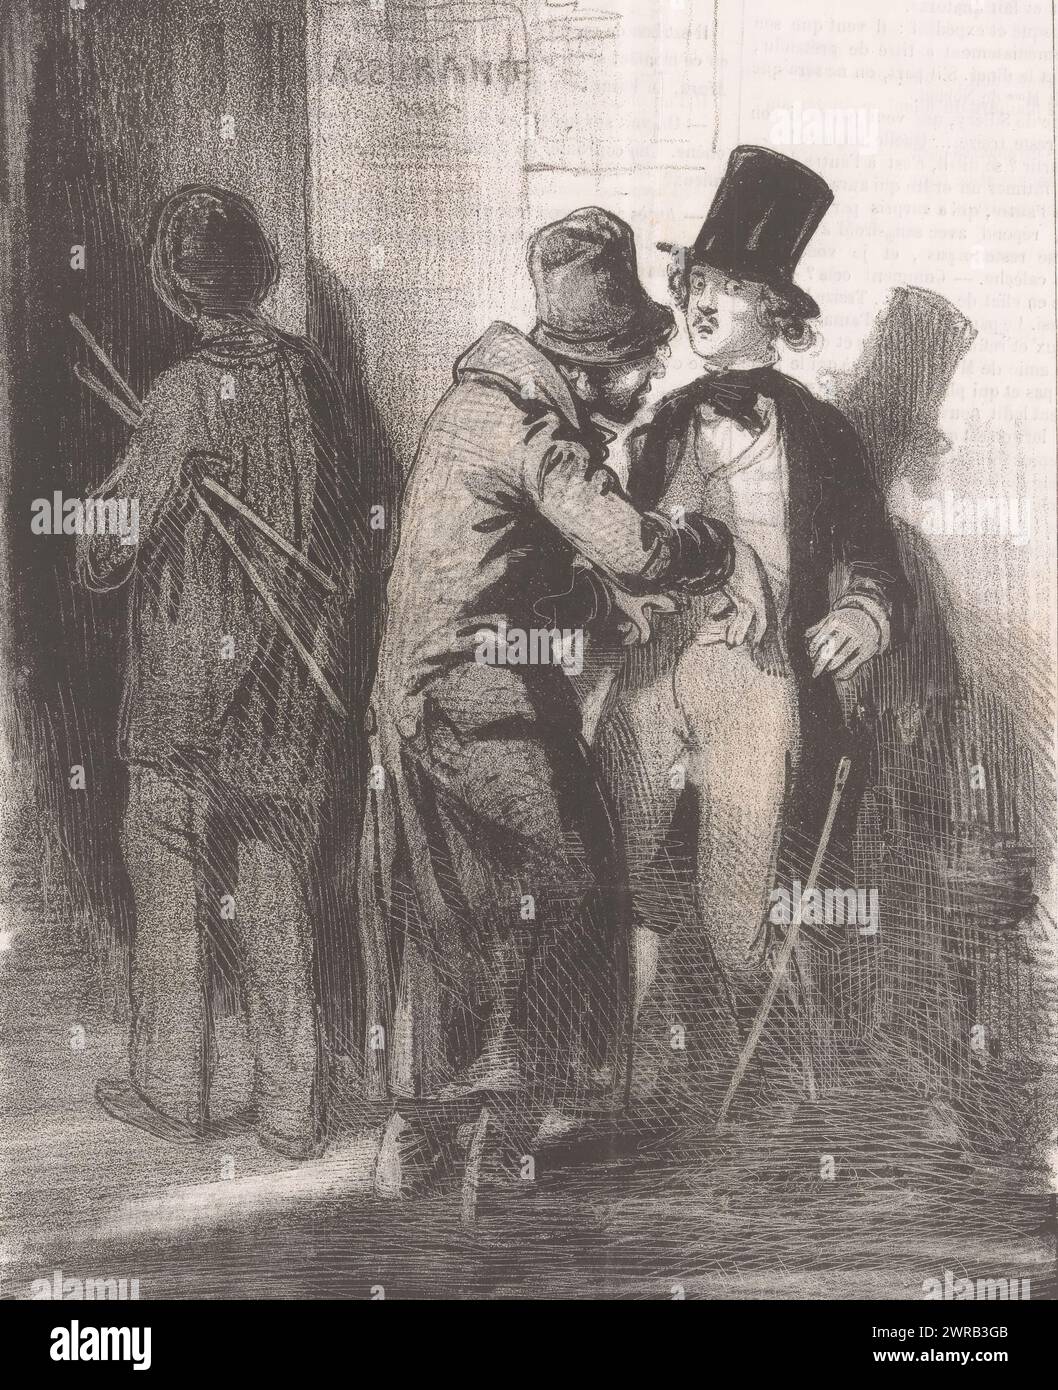 Man is searched on the street by a thief, N'y a pas gras! (title on object), Nightlife in Paris (series title), Paris le soir (series title on object), print maker: Paul Gavarni, printer: Aubert & Cie., publisher: Bauger, Paris, 1840, paper, height 362 mm × width 236 mm, print Stock Photo